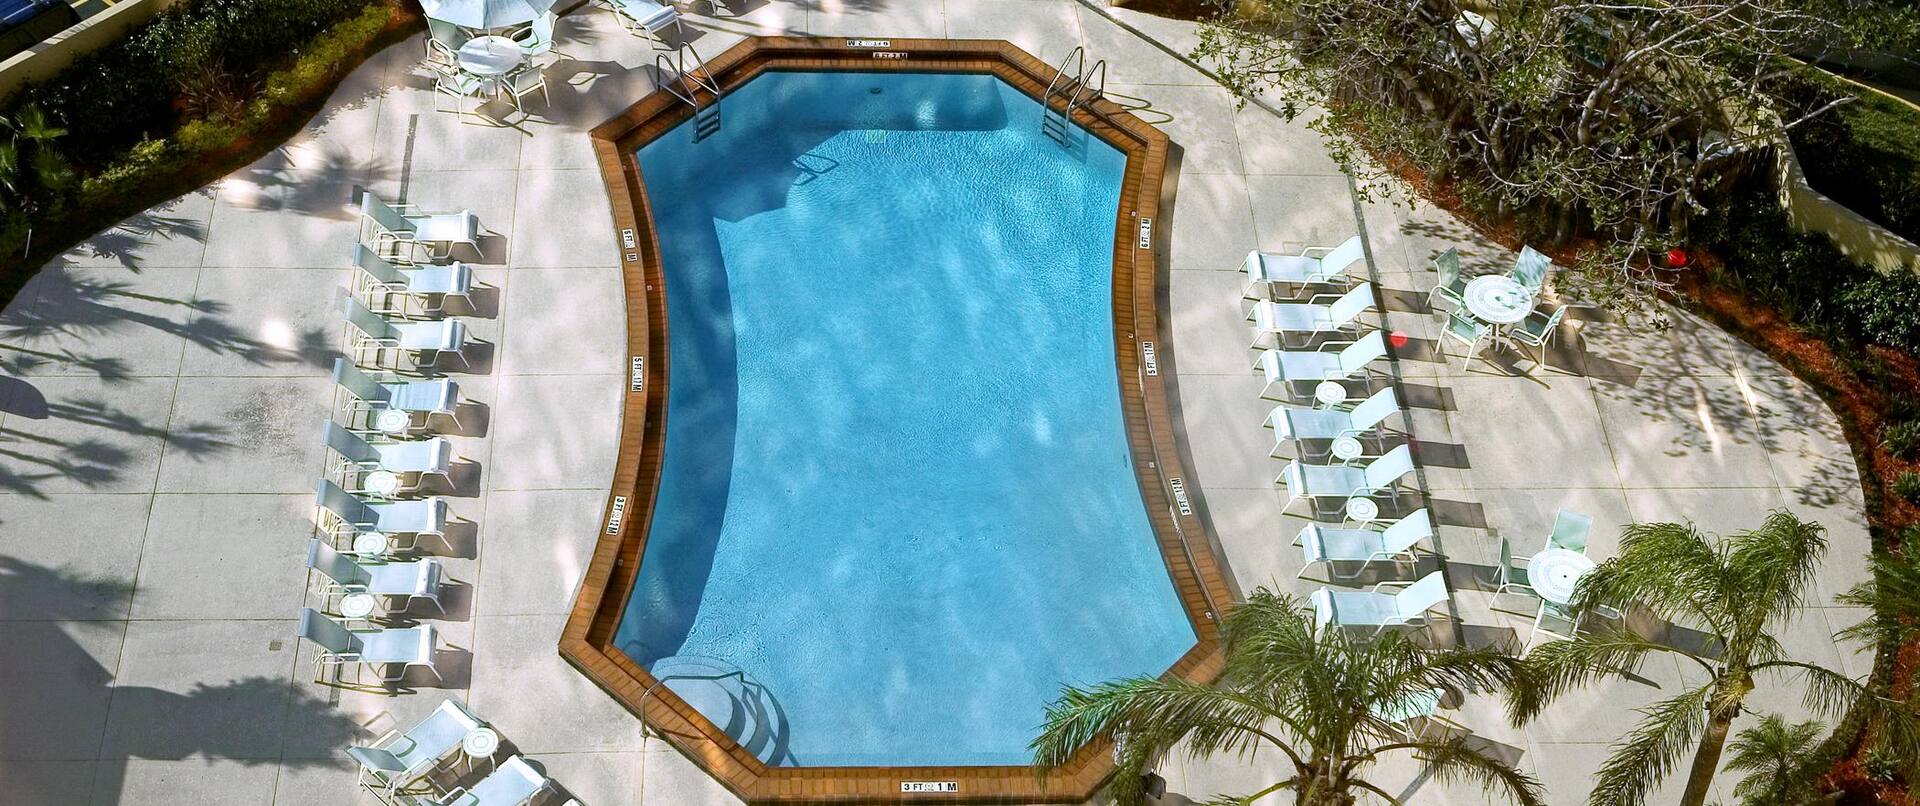 On Site Pool - Arial View of Pool